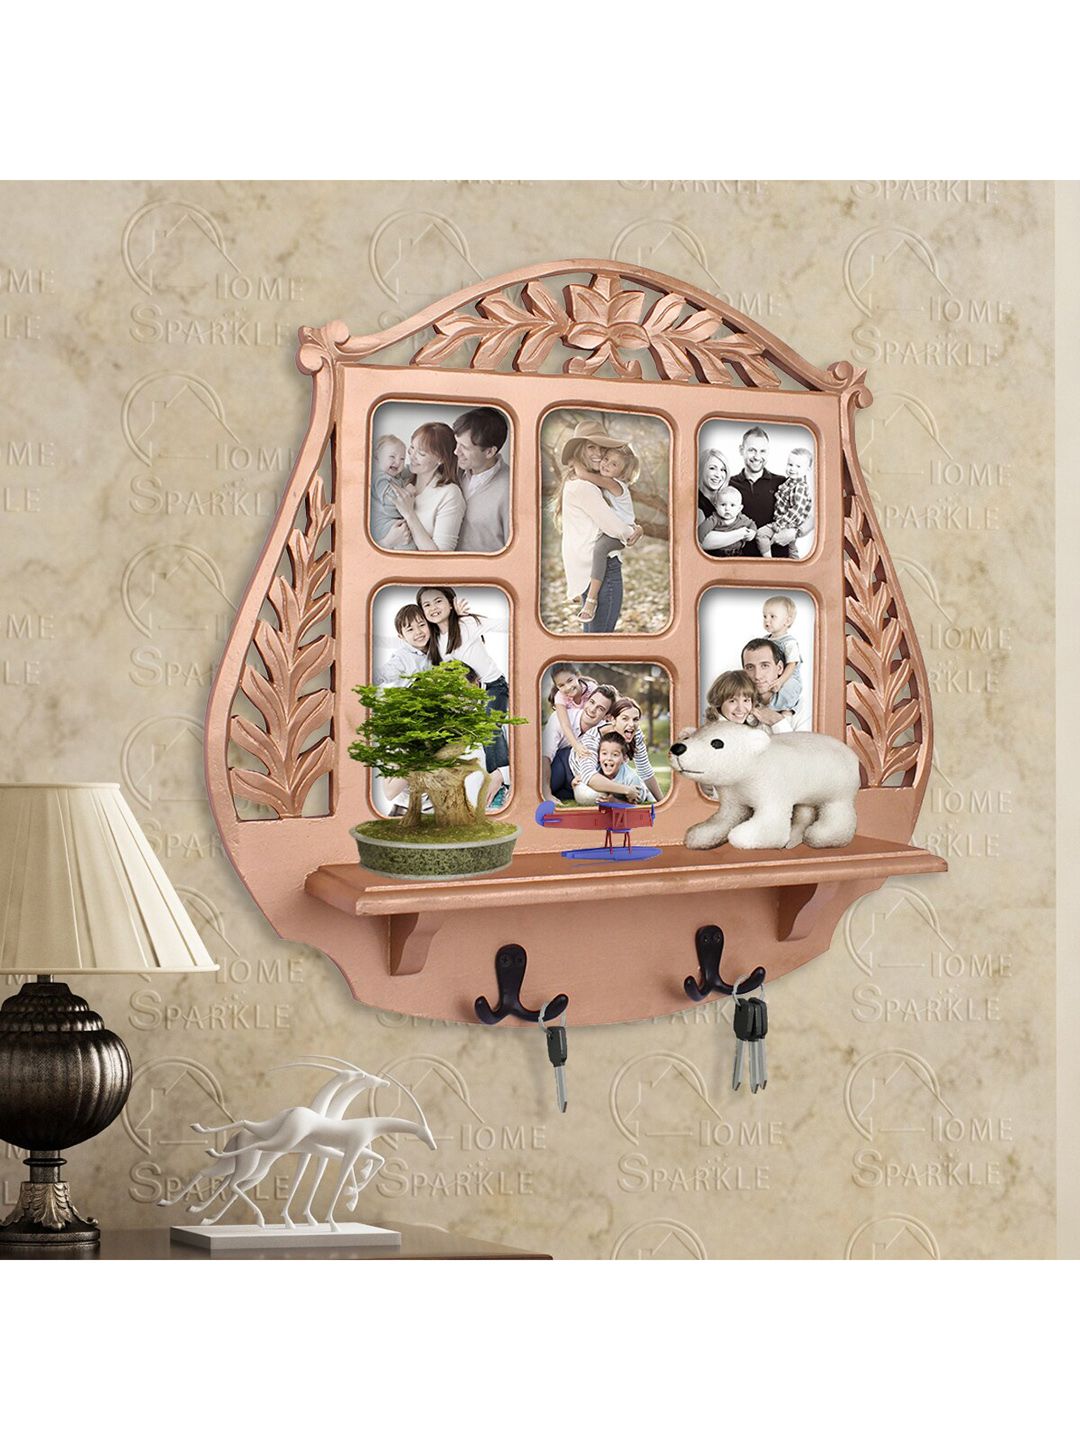 Home Sparkle Textured Wall Shelf with Photoframe and Hooks Price in India